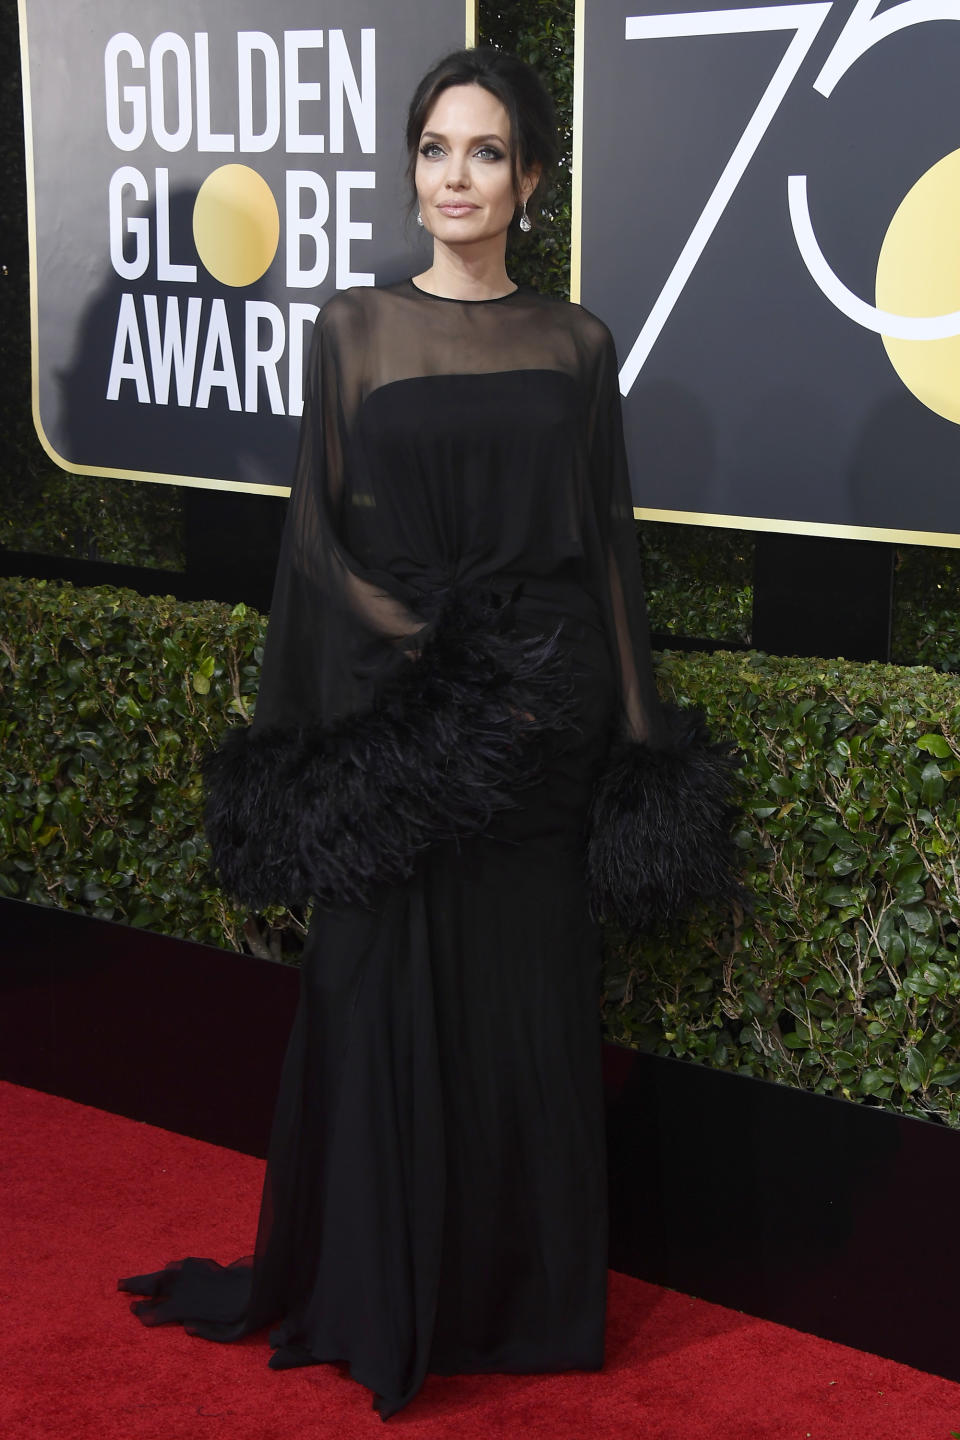 Angelina Jolie at the 75th Annual Golden Globe Awards in January 2018